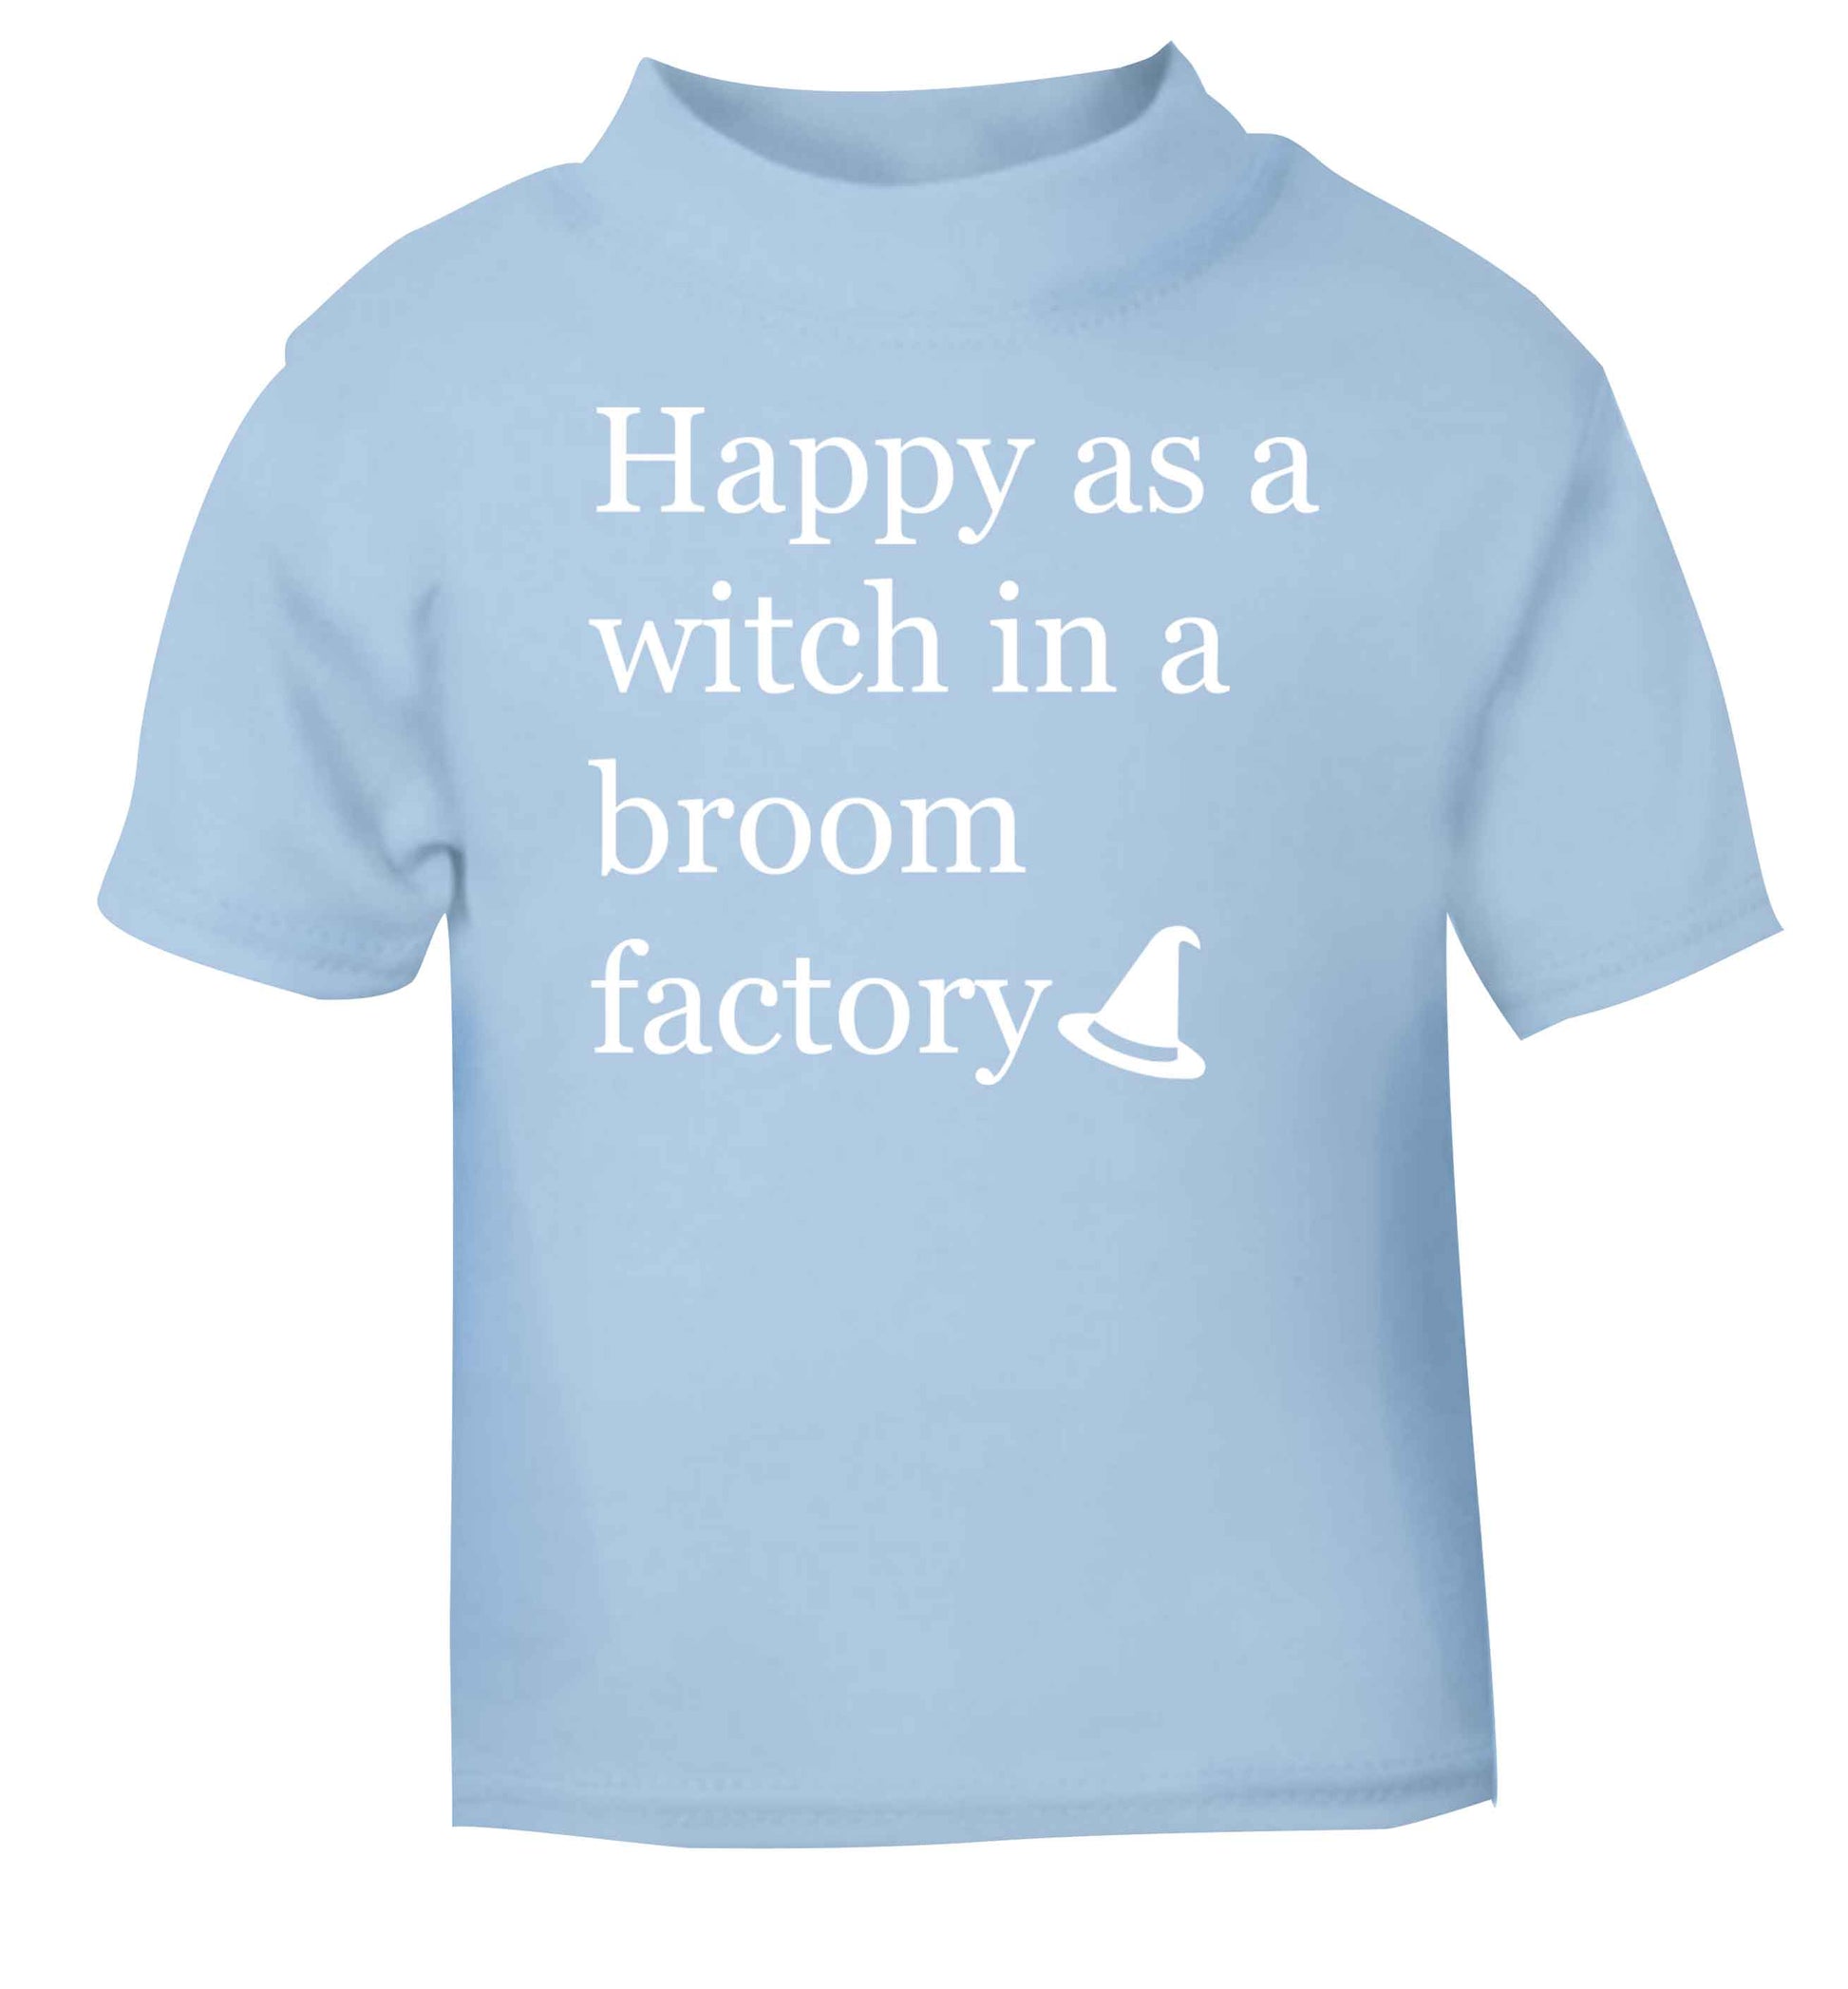 Happy as a witch in a broom factory light blue baby toddler Tshirt 2 Years